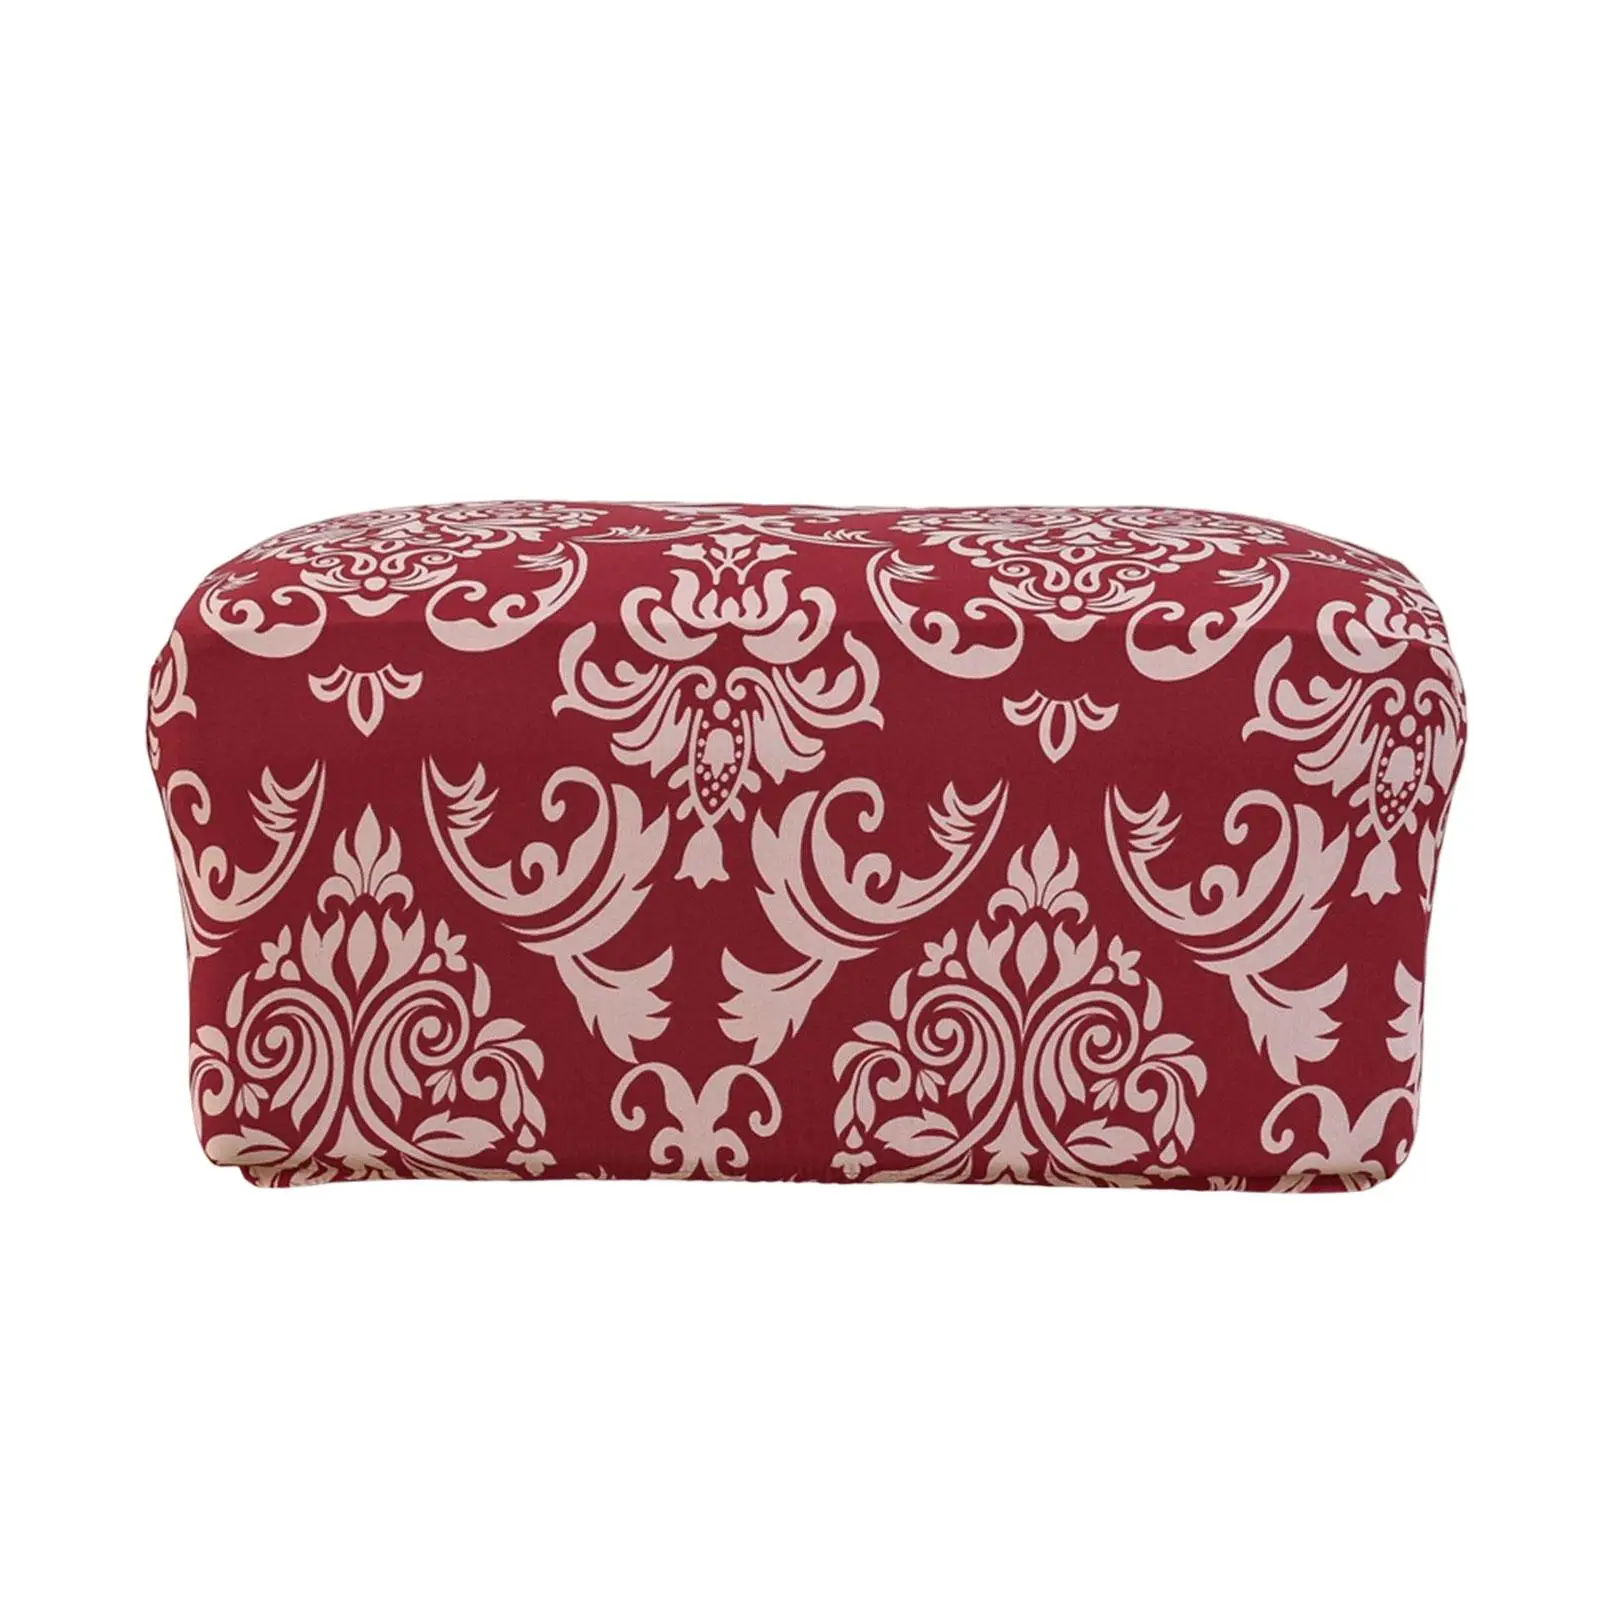 Stretch Footrest Covers Nonslip Printed Protector Soft Slipcover Modern Style Elastic Stretch Ottoman Covers for Bedroom